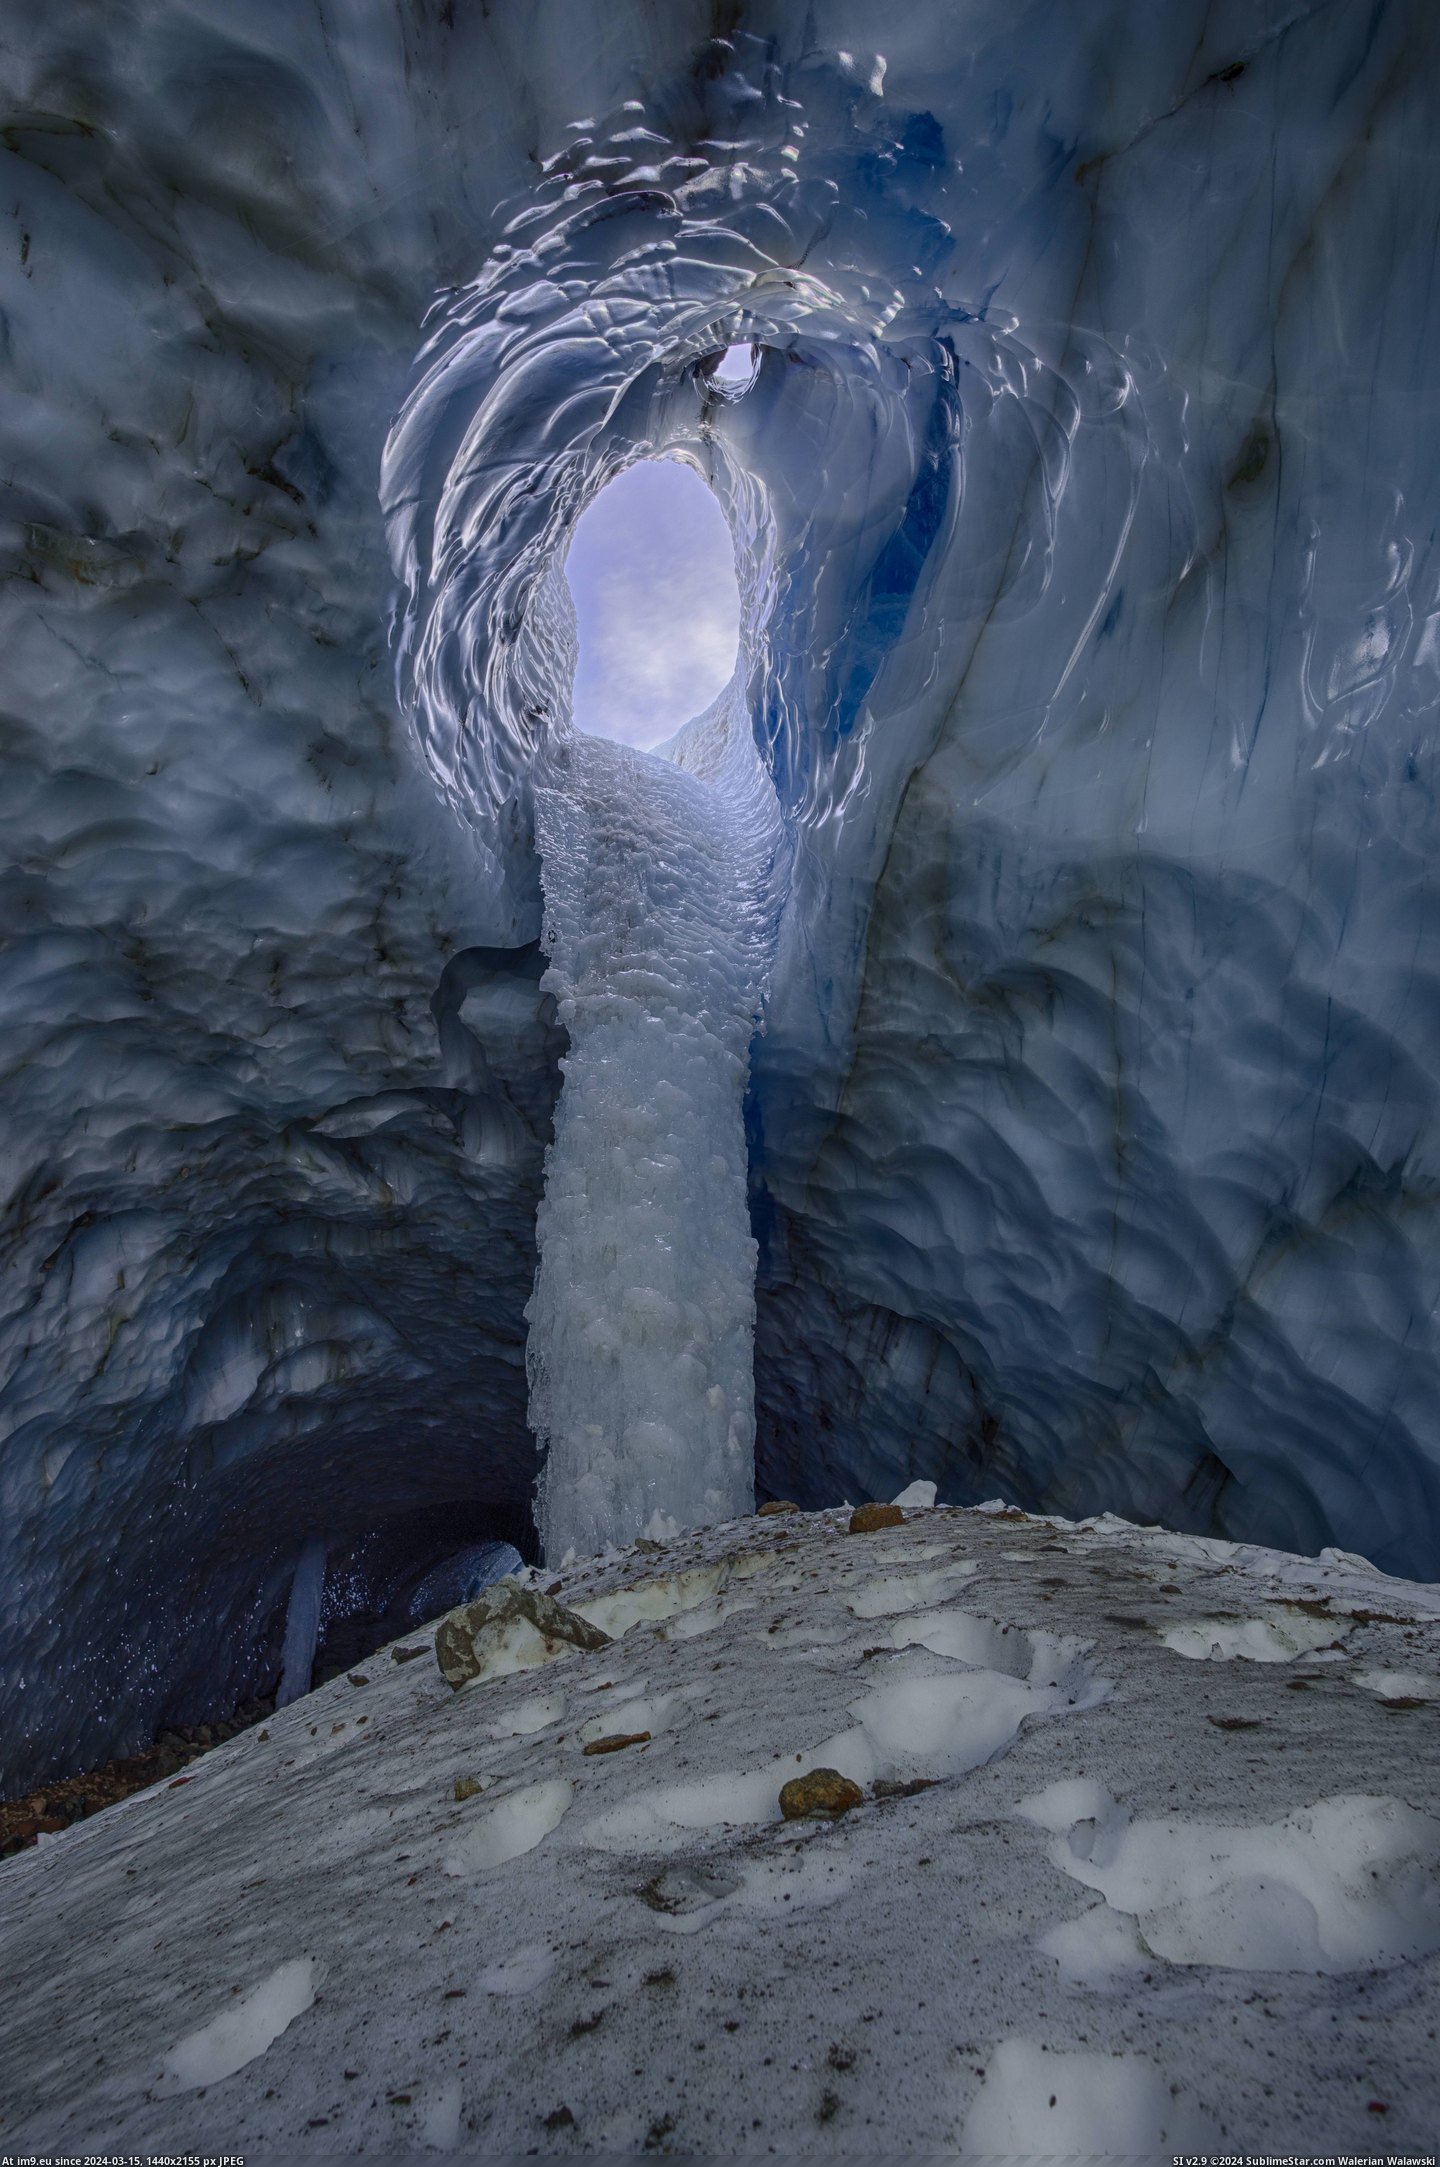 #Photo #Oregon #Waterfall #Hood #Cave #Glacier #Frozen [Earthporn] A view to the outside through a frozen waterfall inside a glacier cave on Mt. Hood, Oregon  [4009x6011] Photo by: Ja Pic. (Bild von album My r/EARTHPORN favs))